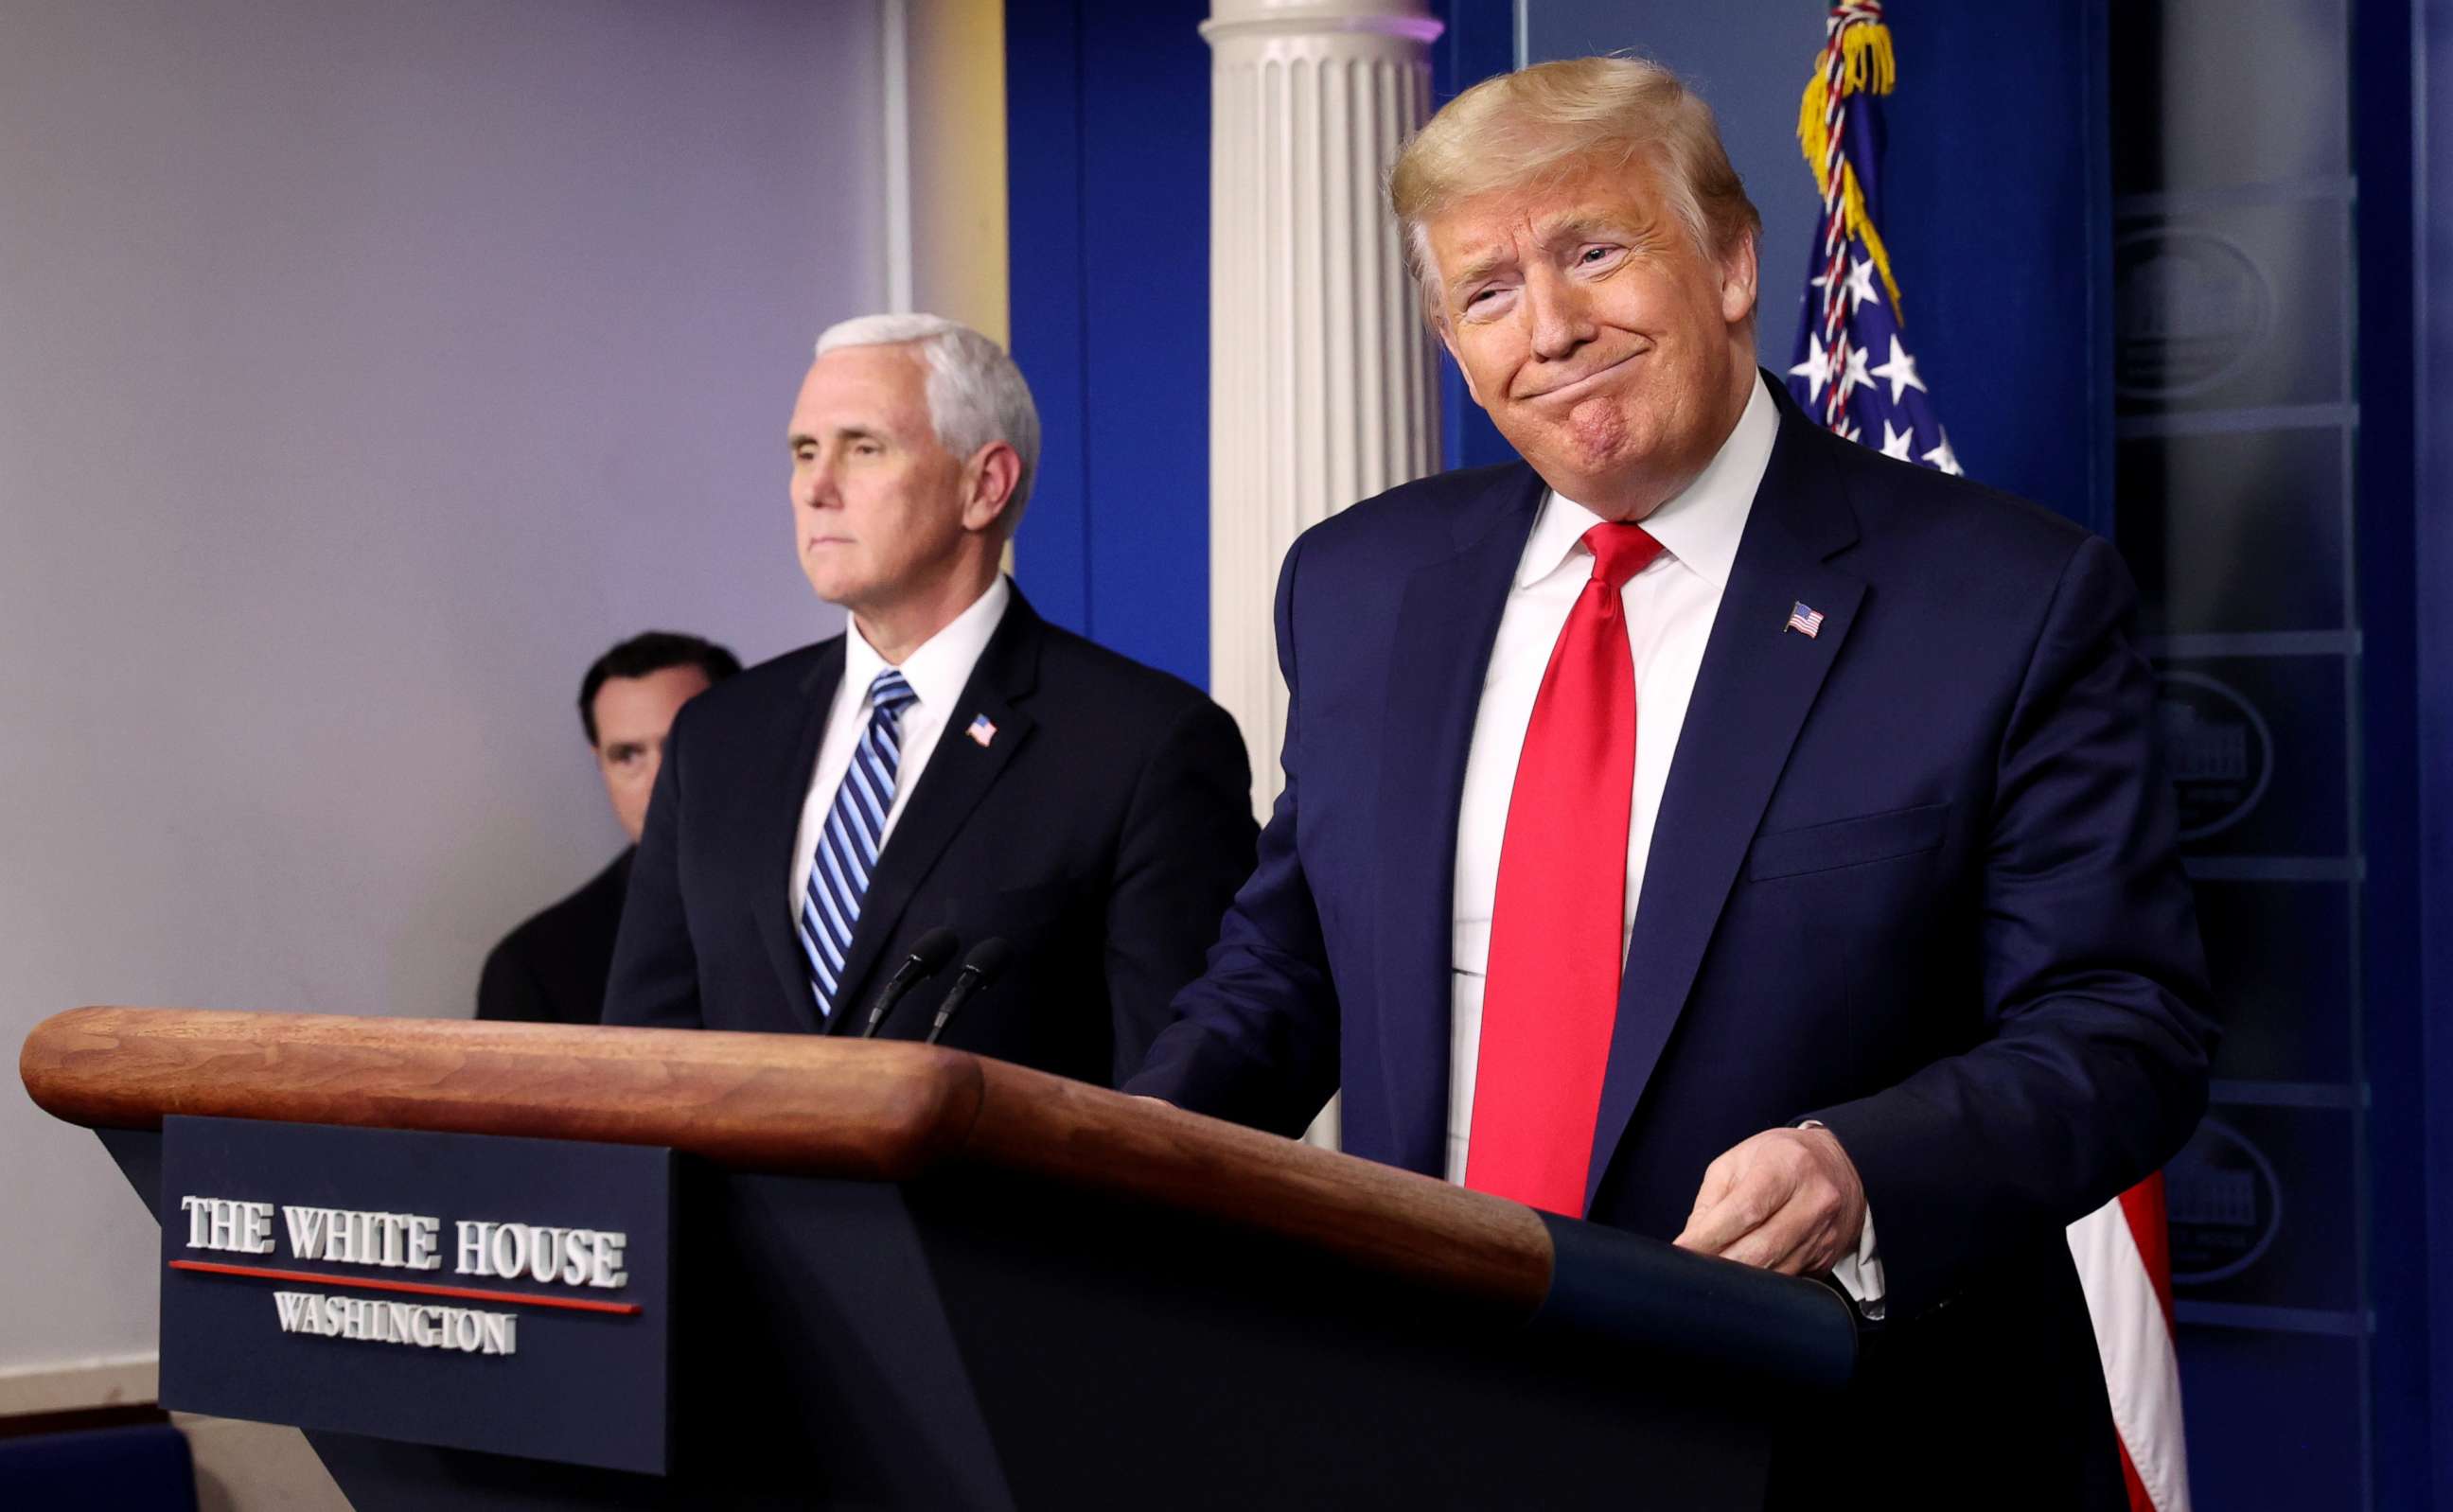 PHOTO: President Donald Trump arrives with Vice President Mike Pence to lead the daily coronavirus task force briefing at the White House in Washington, April 9, 2020.